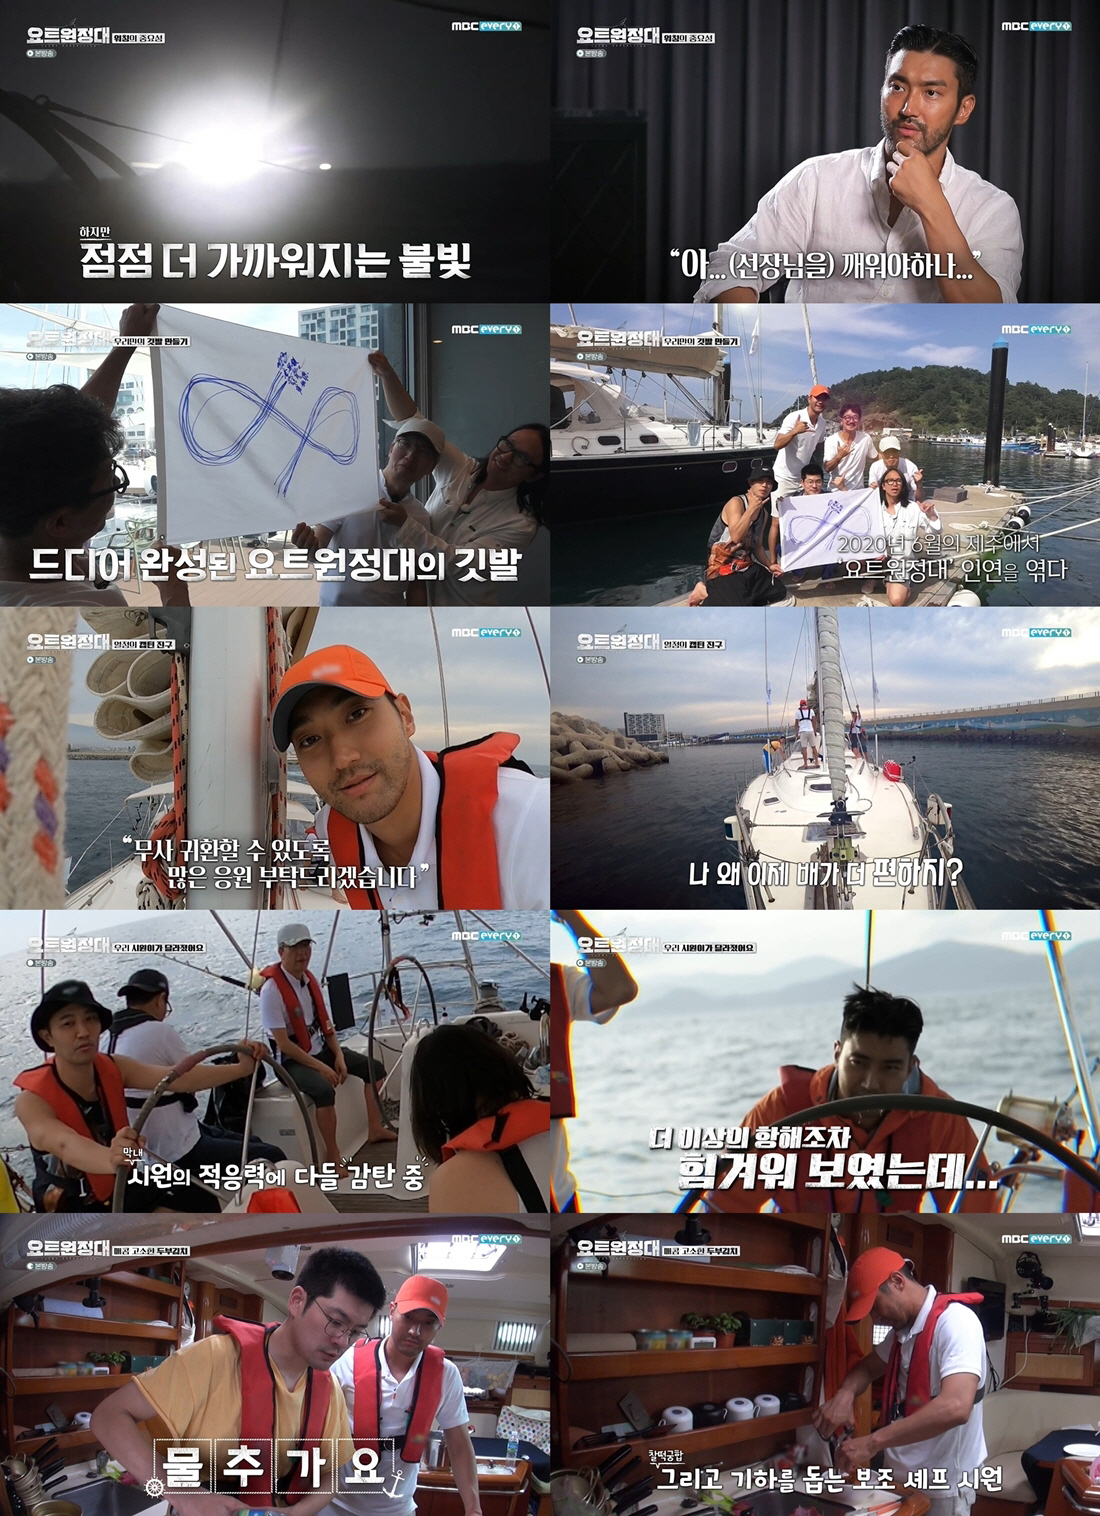 In the third episode of MBCs Yacht Expedition, which aired on August 31, the story of Jin Goo, Choi Siwon, Chang Kiha, and Song Ho-jun left the South Korean territorial waters and headed to the Pacific Ocean ocean in the South Cross.  They had never been to seasickness before.  The crew adapted to the yacht, and now they show edits to their hands and feet.Choi Siwons change was the most striking.  Earlier, Choi Siwon showed himself suffering from severe motion sickness on his first day of departure.  During the broadcast, Choi Siwon completely overcame motion sickness and looked relaxed as he walked around the yacht.  Looking at Chang Kihas youngest, Choi Siwon, who helps prepare meals, Jin Goo says, I have to do original sat.  Im cooking now.Choi Siwon also made a quick decision during the night voyage to overcome the crisis.  On this day, the yacht expedition was confronted by a large vessel that quickly approached the yacht in the black sea.  Choi Siwon was baffled by the unexpected situation but immediately called the captain.  Eventually, the ship was forced to change routes, and Choi Siwon said, The night sea seems more unpredictable.  It was almost a big day, he recalled at a time when tension swelled.On this day, the yacht expedition successfully made its first voyage to Jeju Island after leaving the Great Islands.  In about 40 hours, the crew smiling as they felt a little happy that the floor was unshaken.  The crew also made a team flag for the yacht expedition.  The team flag struck a different person, but it was tied tightly like a knot and captured the desire for a return to safety.Afterwards, the yacht expedition, which was back on the boat, left territorial waters and headed for the Pacific Ocean, receiving a super-luxury escort from the South Korean coast.  Now that he cant get to the ground until hes back, the crew seemed to have a lot of thought.  Heres a situation where mobile phone communication is soon to be lost.  The crew smiled as they called their families and gained strength.  In particular, Jin Goo was seen crying on a video call with the kids singing Daddy Power singing.Chang Kiha, the main chef of the yacht expedition on the re-launched voyage, prepared kimchi for the crew.  Chang Kiha said, Its hard, but its harder if you eat something thats not tasty.  We should avoid that, said Choi Siwon, assistant chef who helped Chang Kiha.  Chang Kiha, who is meticulously contemplating menu combinations and plating, and choi Siwon, the youngest eager to be praised by his brother, smiled at the audience.In the midst of this, Captain Kim Sang-jin said, I think a strong wind will come in two days, which made the crew nervous.  What unpredictable things would happen in front of the yacht expedition on the Pacific Ocean voyage in earnest, and the sight of those heading out into the larger sea sparked the question of the beginning of an unusual adventure.  MBCs Yacht Expedition airs every Monday at 8:30 p.m.